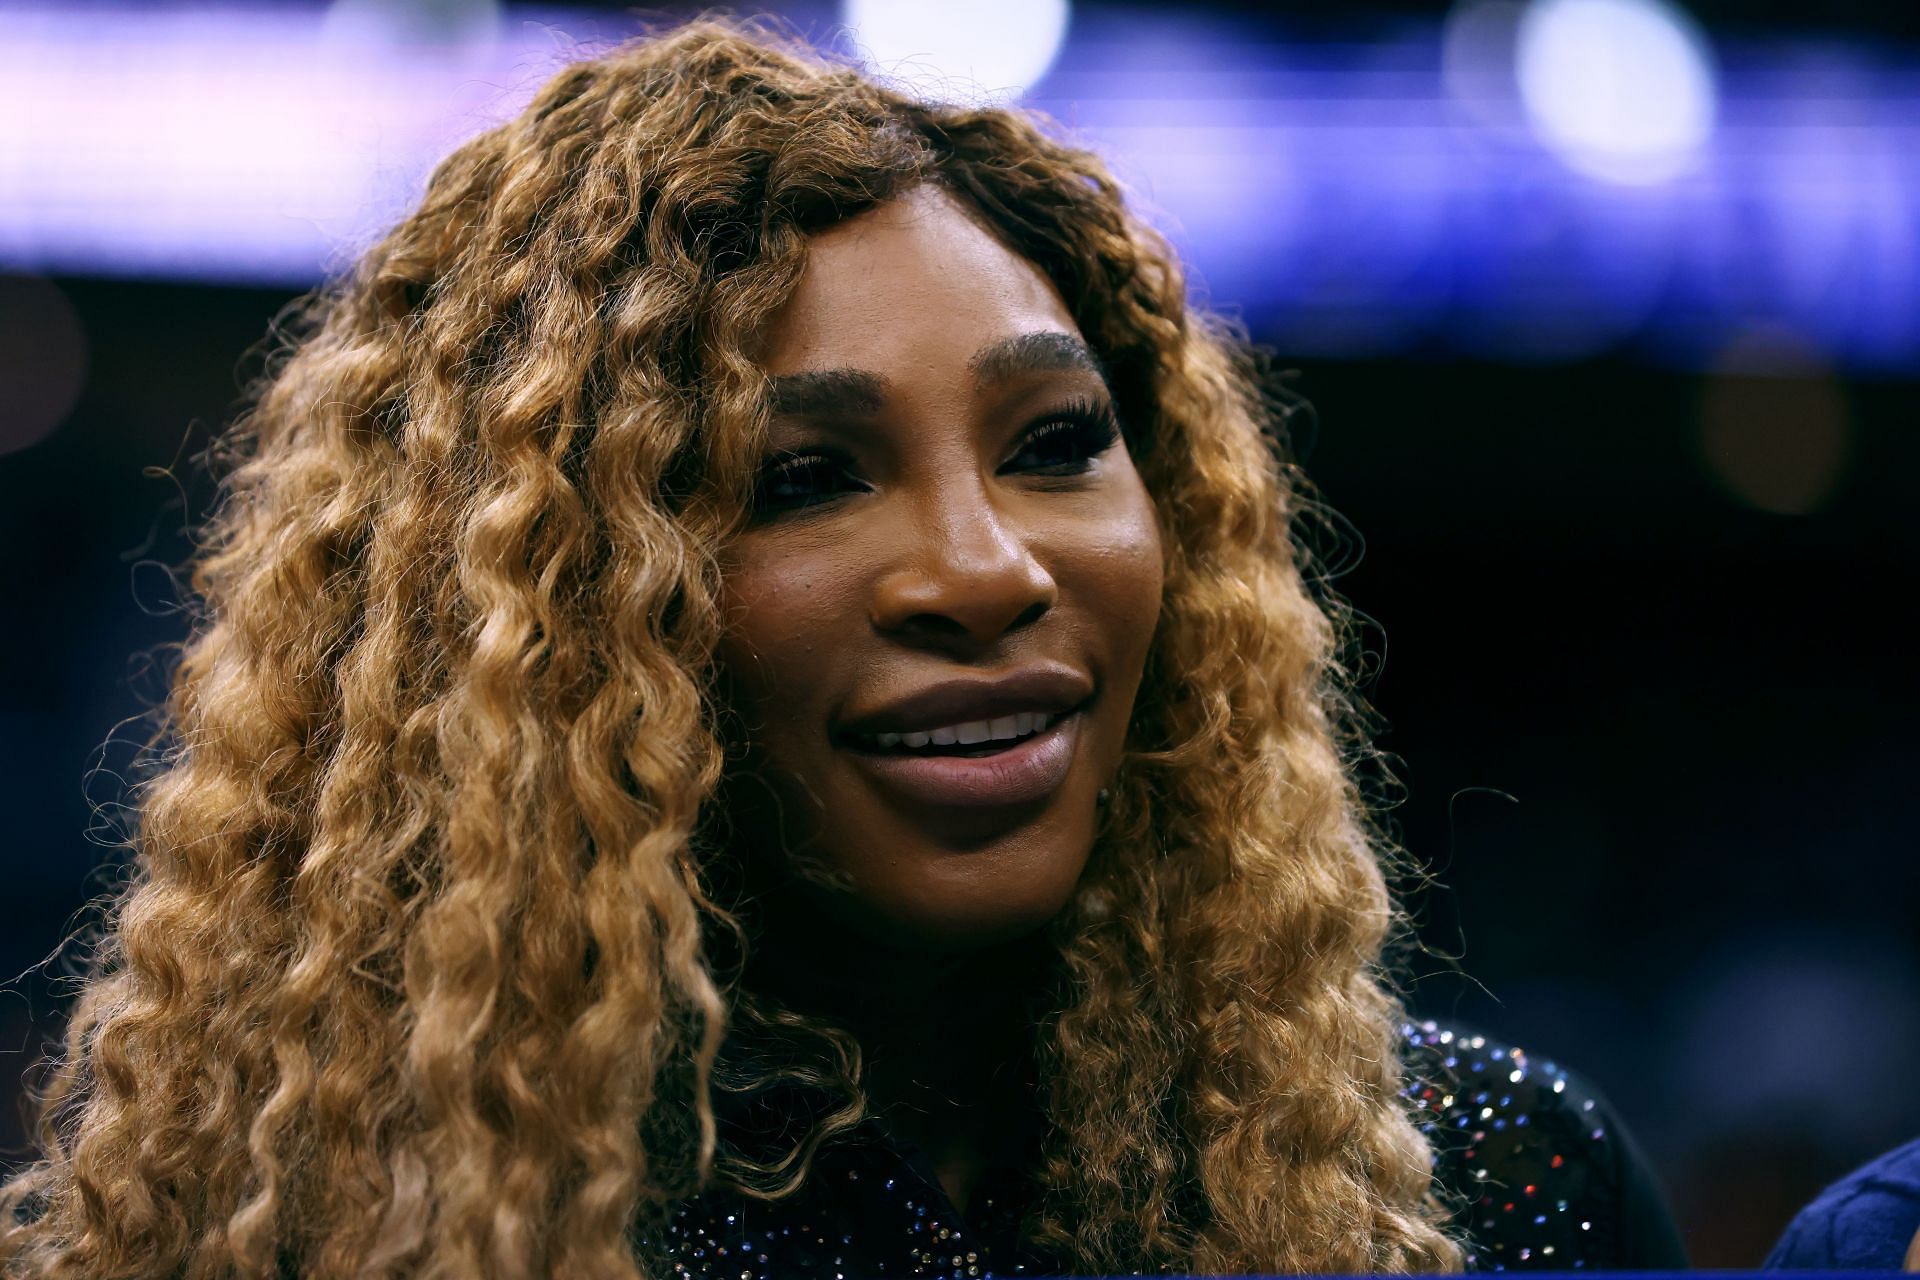 Serena Williams takes to social media to congratulate Will Smith on winning  the NAACP Image Award for King Richard